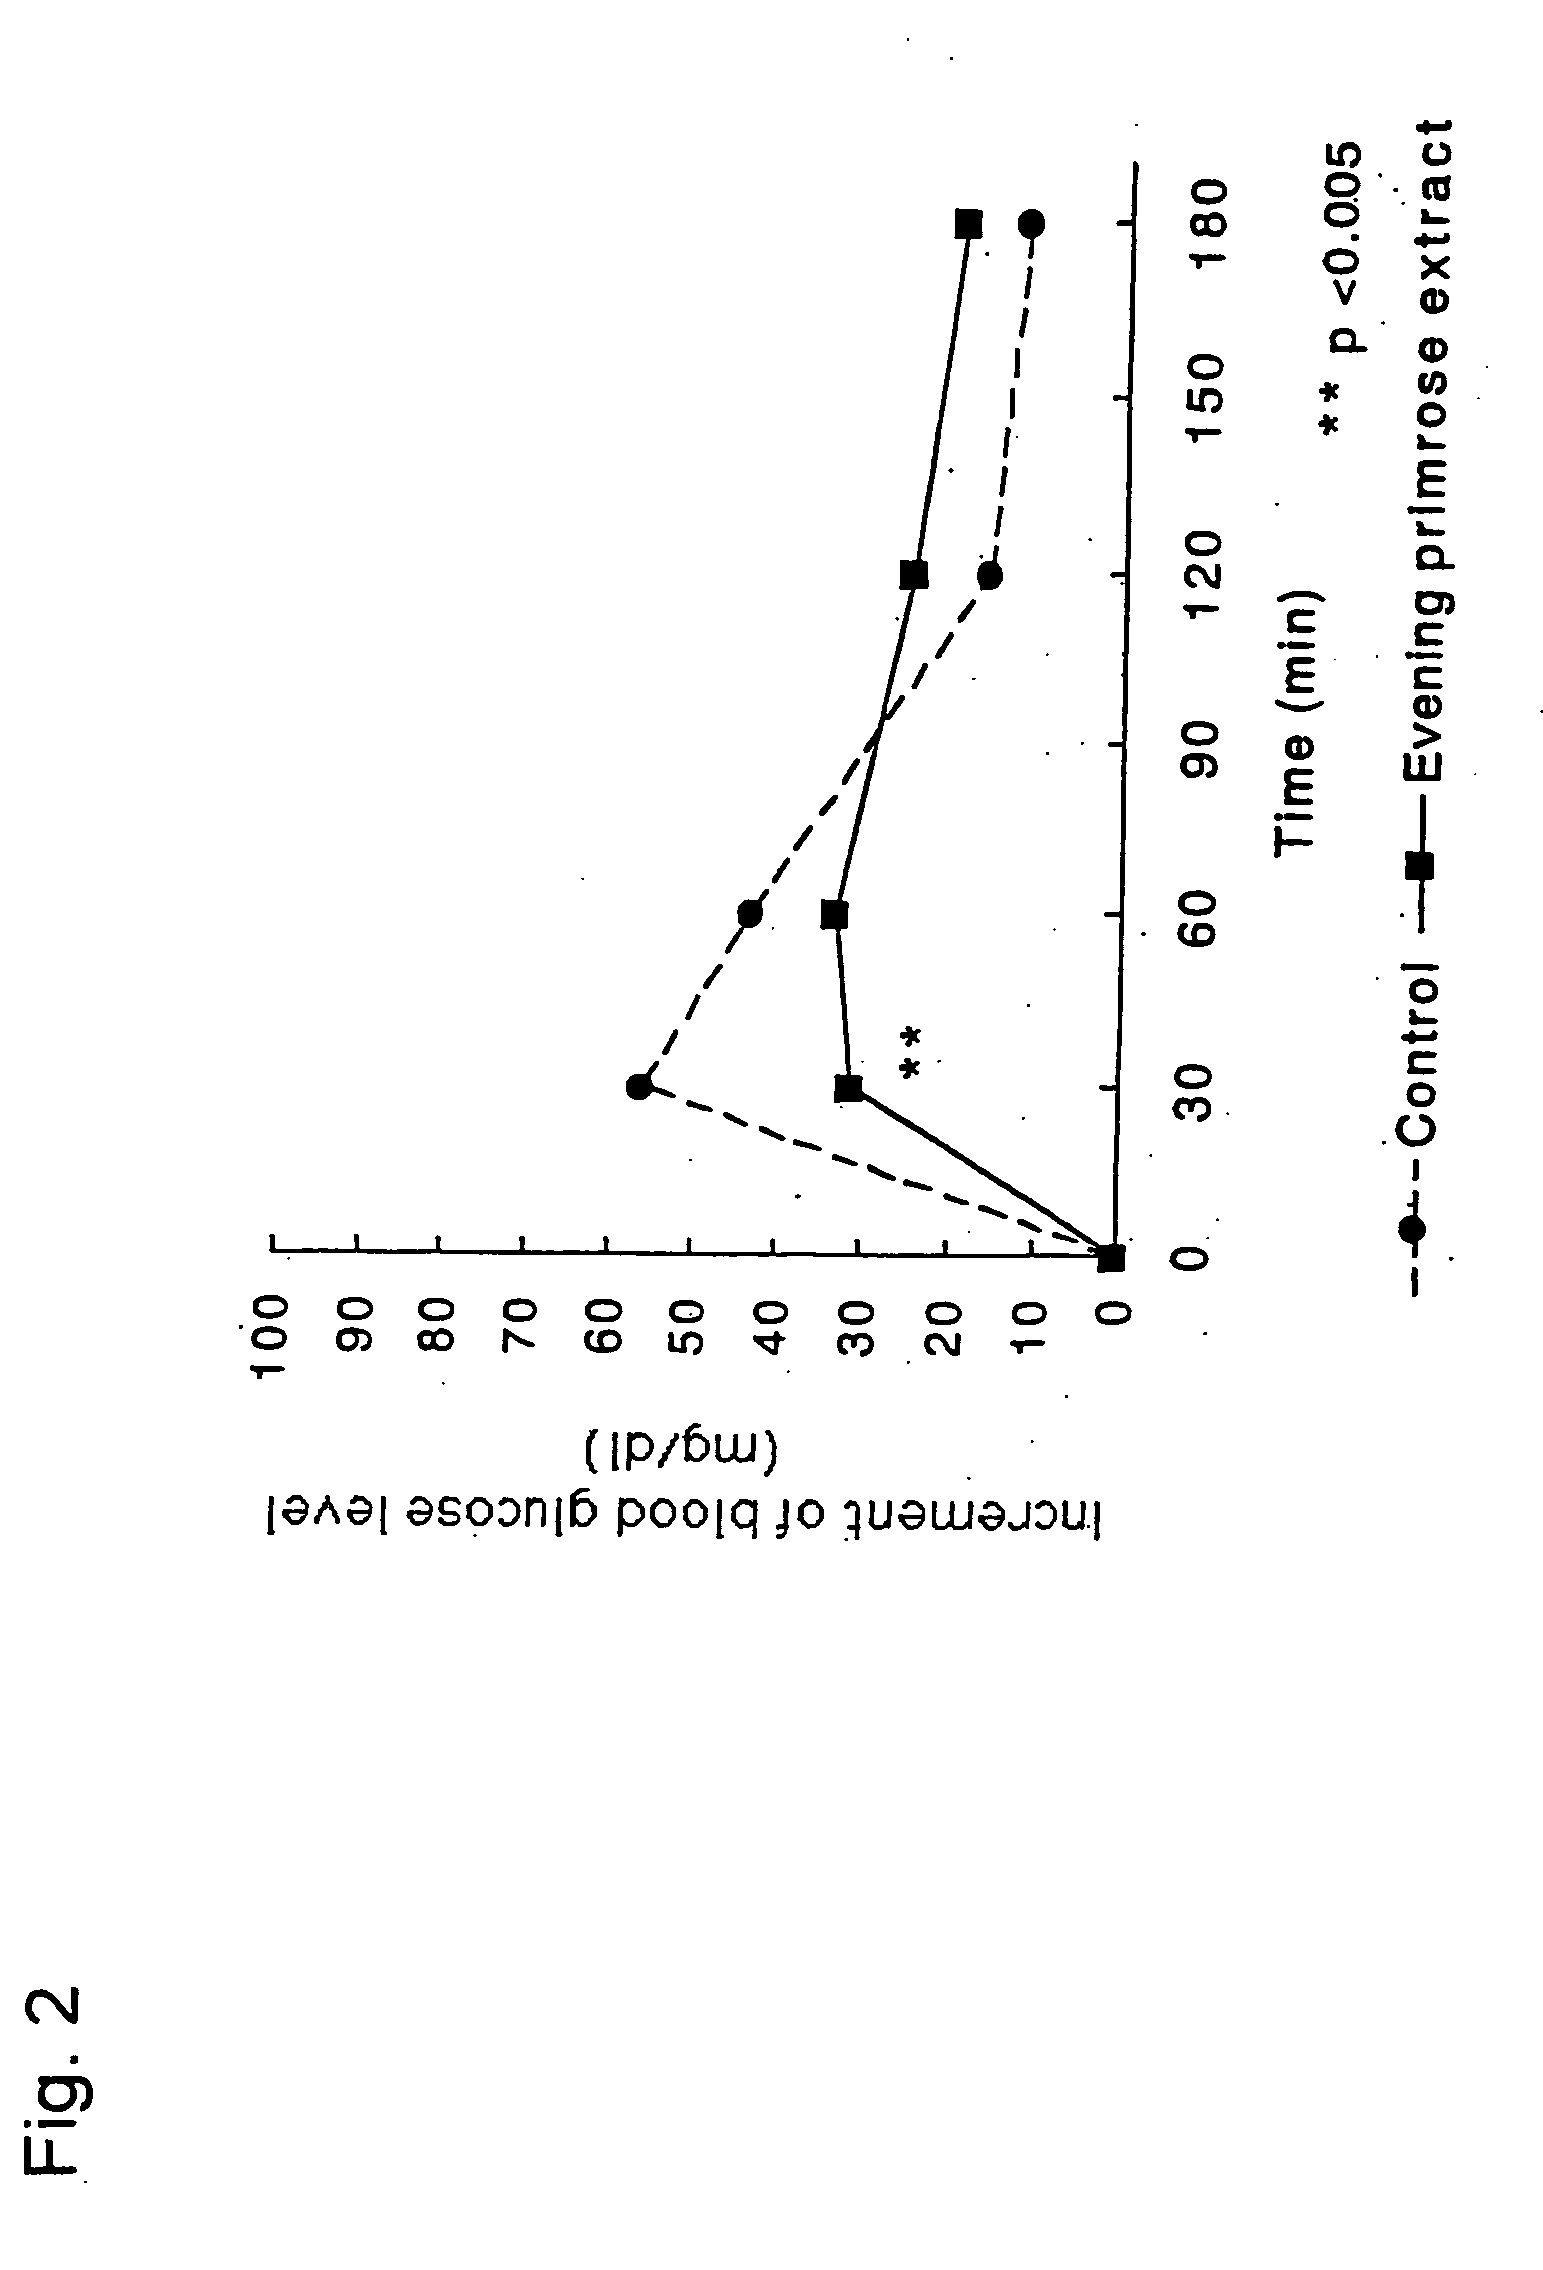 Method of treating diabetes and obesity using carbohydrate absorption inhibitors